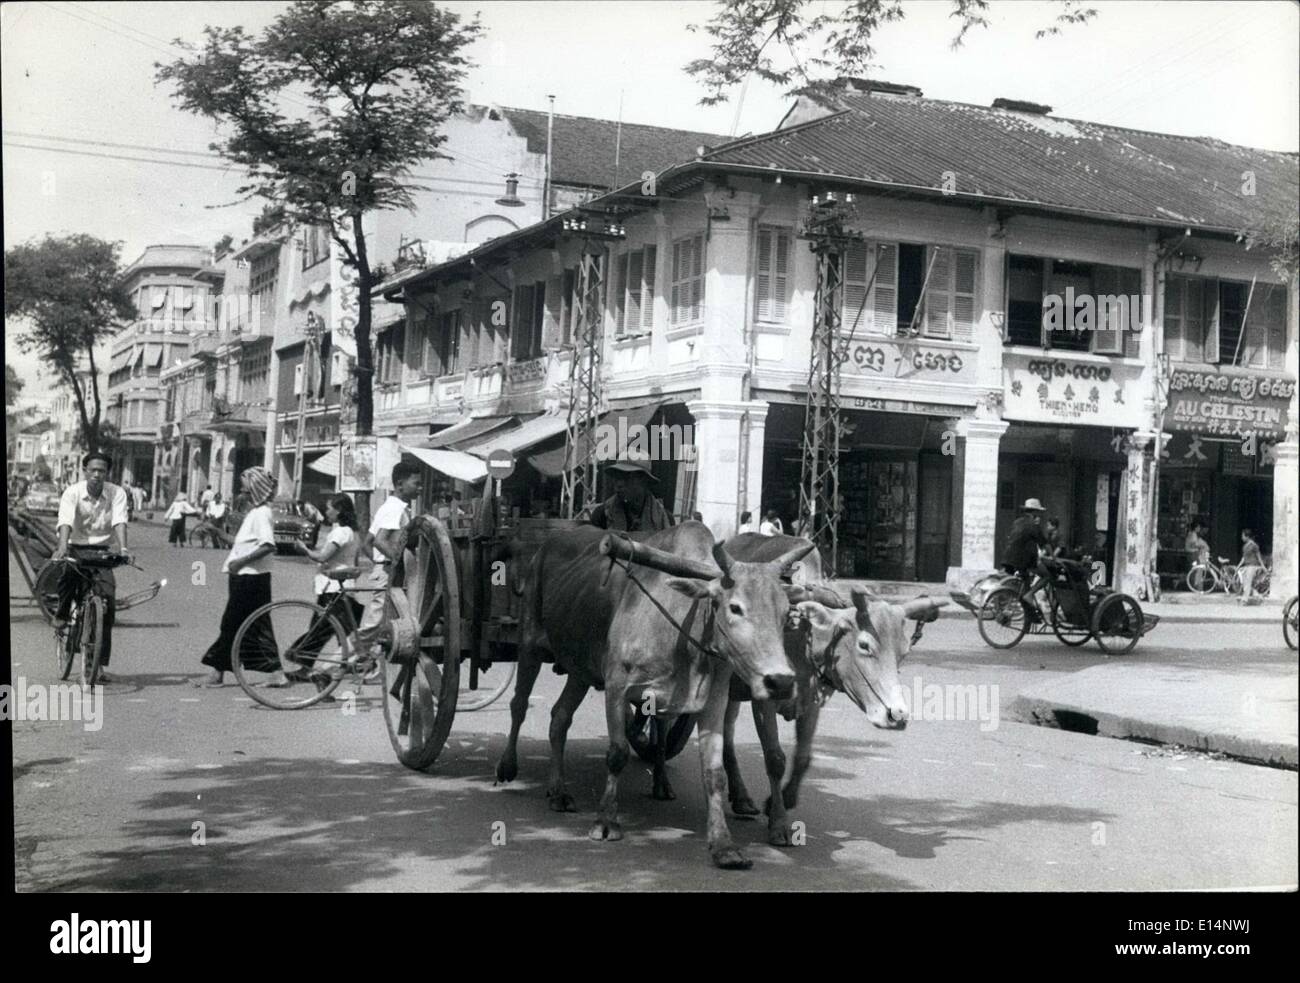 Apr. 18, 2012 - Series 2 (S.E.Asia) Cambodia: Although Phnom Penh can be classified as a modern city, old native customs prevail, and ancient means of transport mixes with the modern vehicles. This Cambodian farmer with his ox wagon is not uncommon in Phnom Penh. Stock Photo